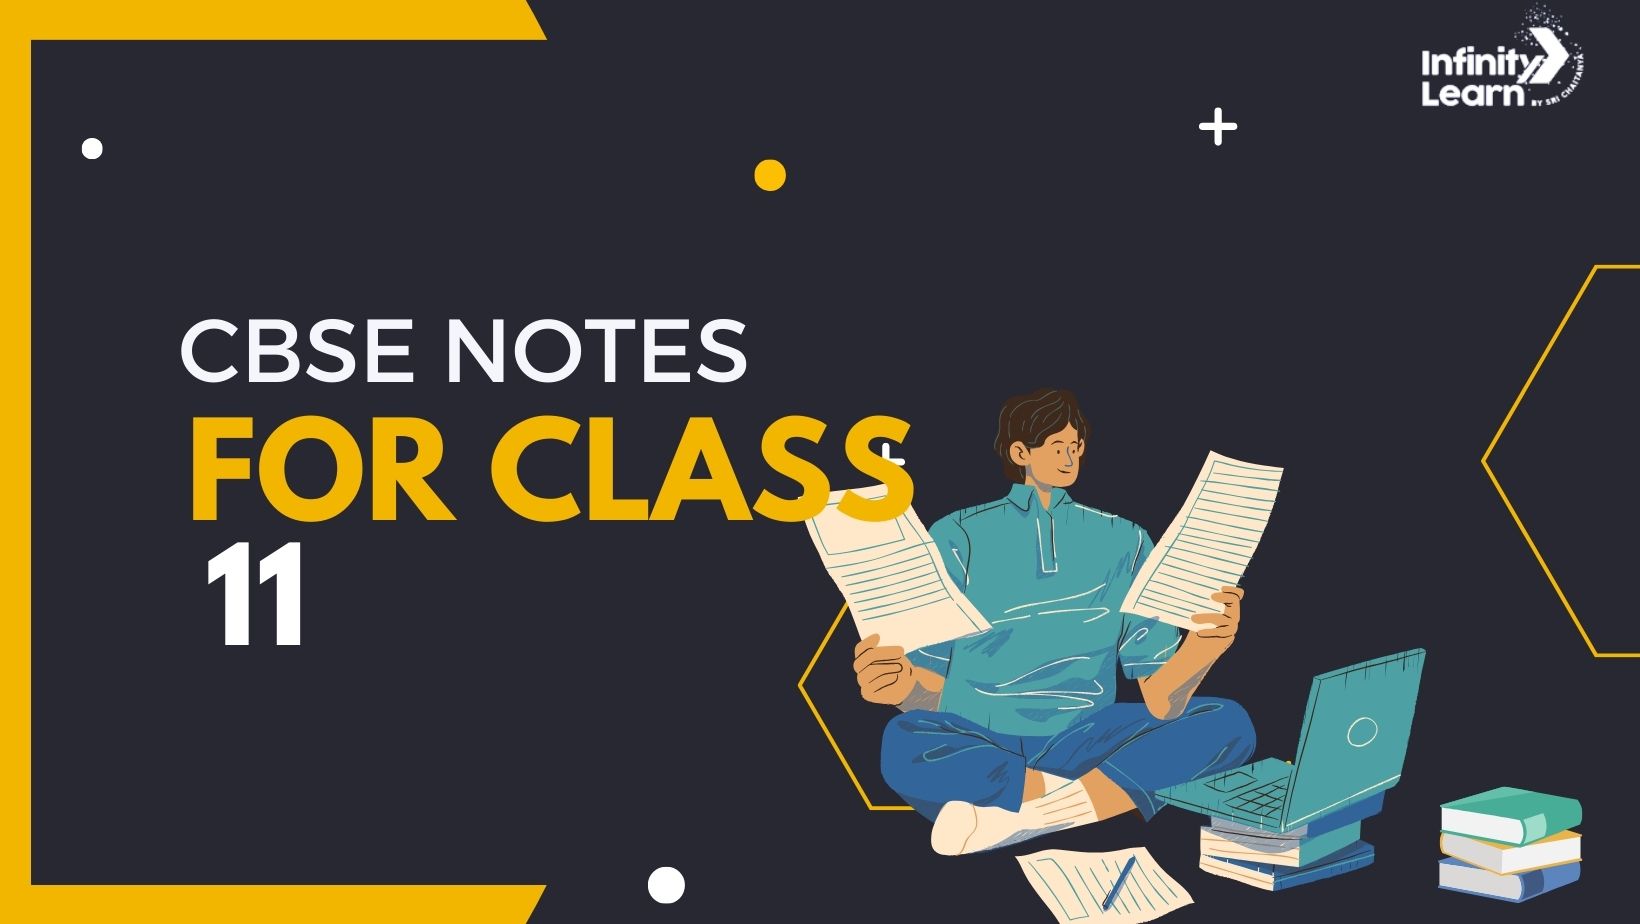 CBSE Notes for Class 11